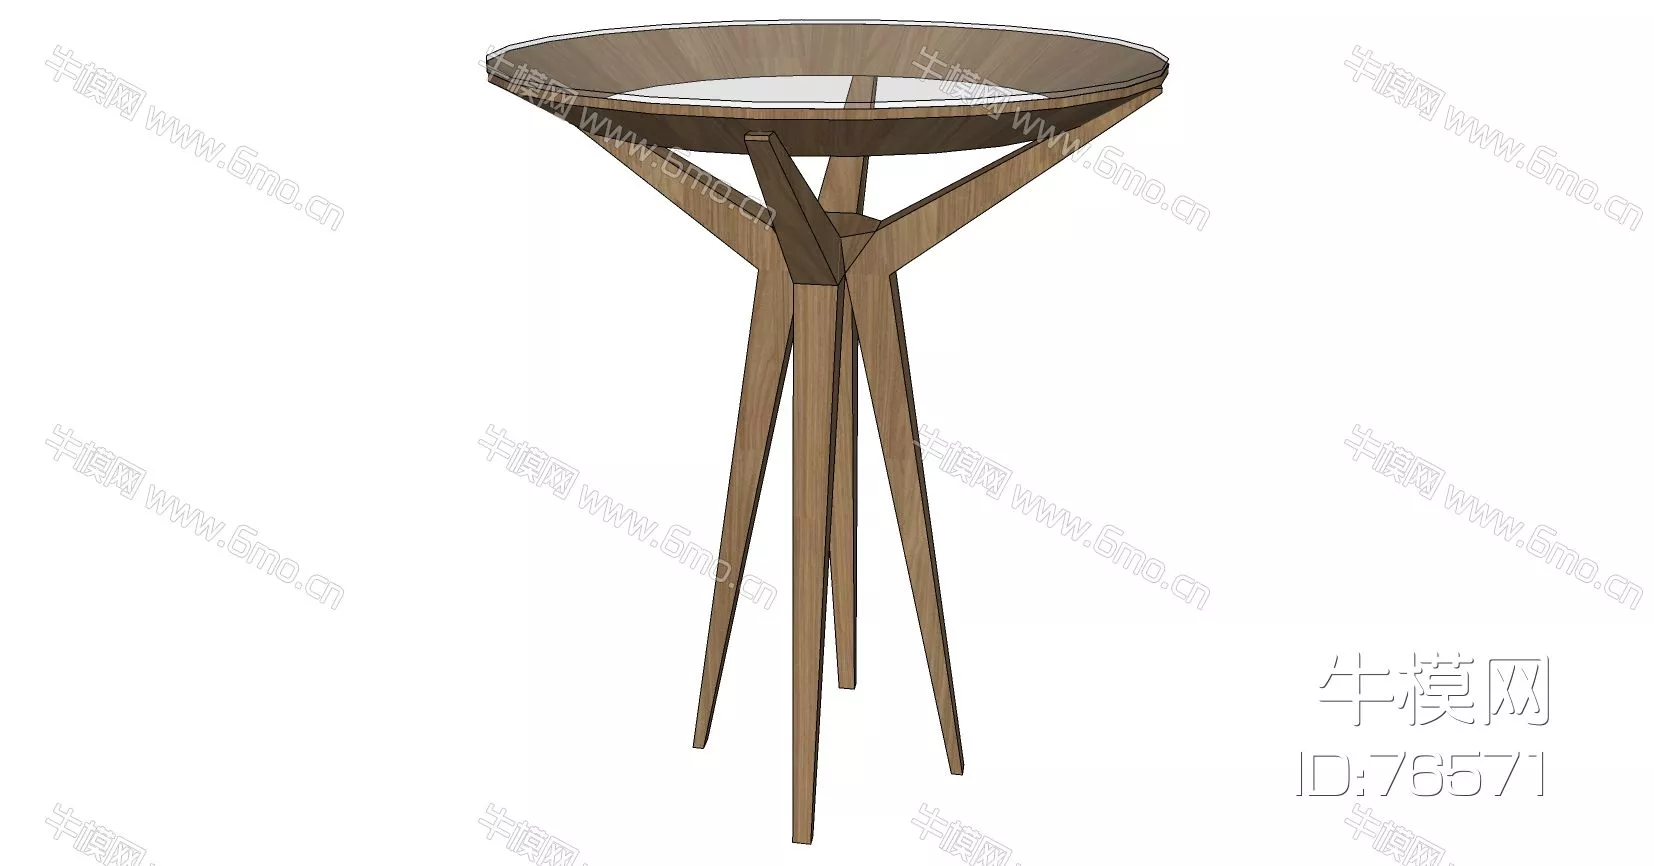 MODERN COFFEE TABLE - SKETCHUP 3D MODEL - ENSCAPE - 76571